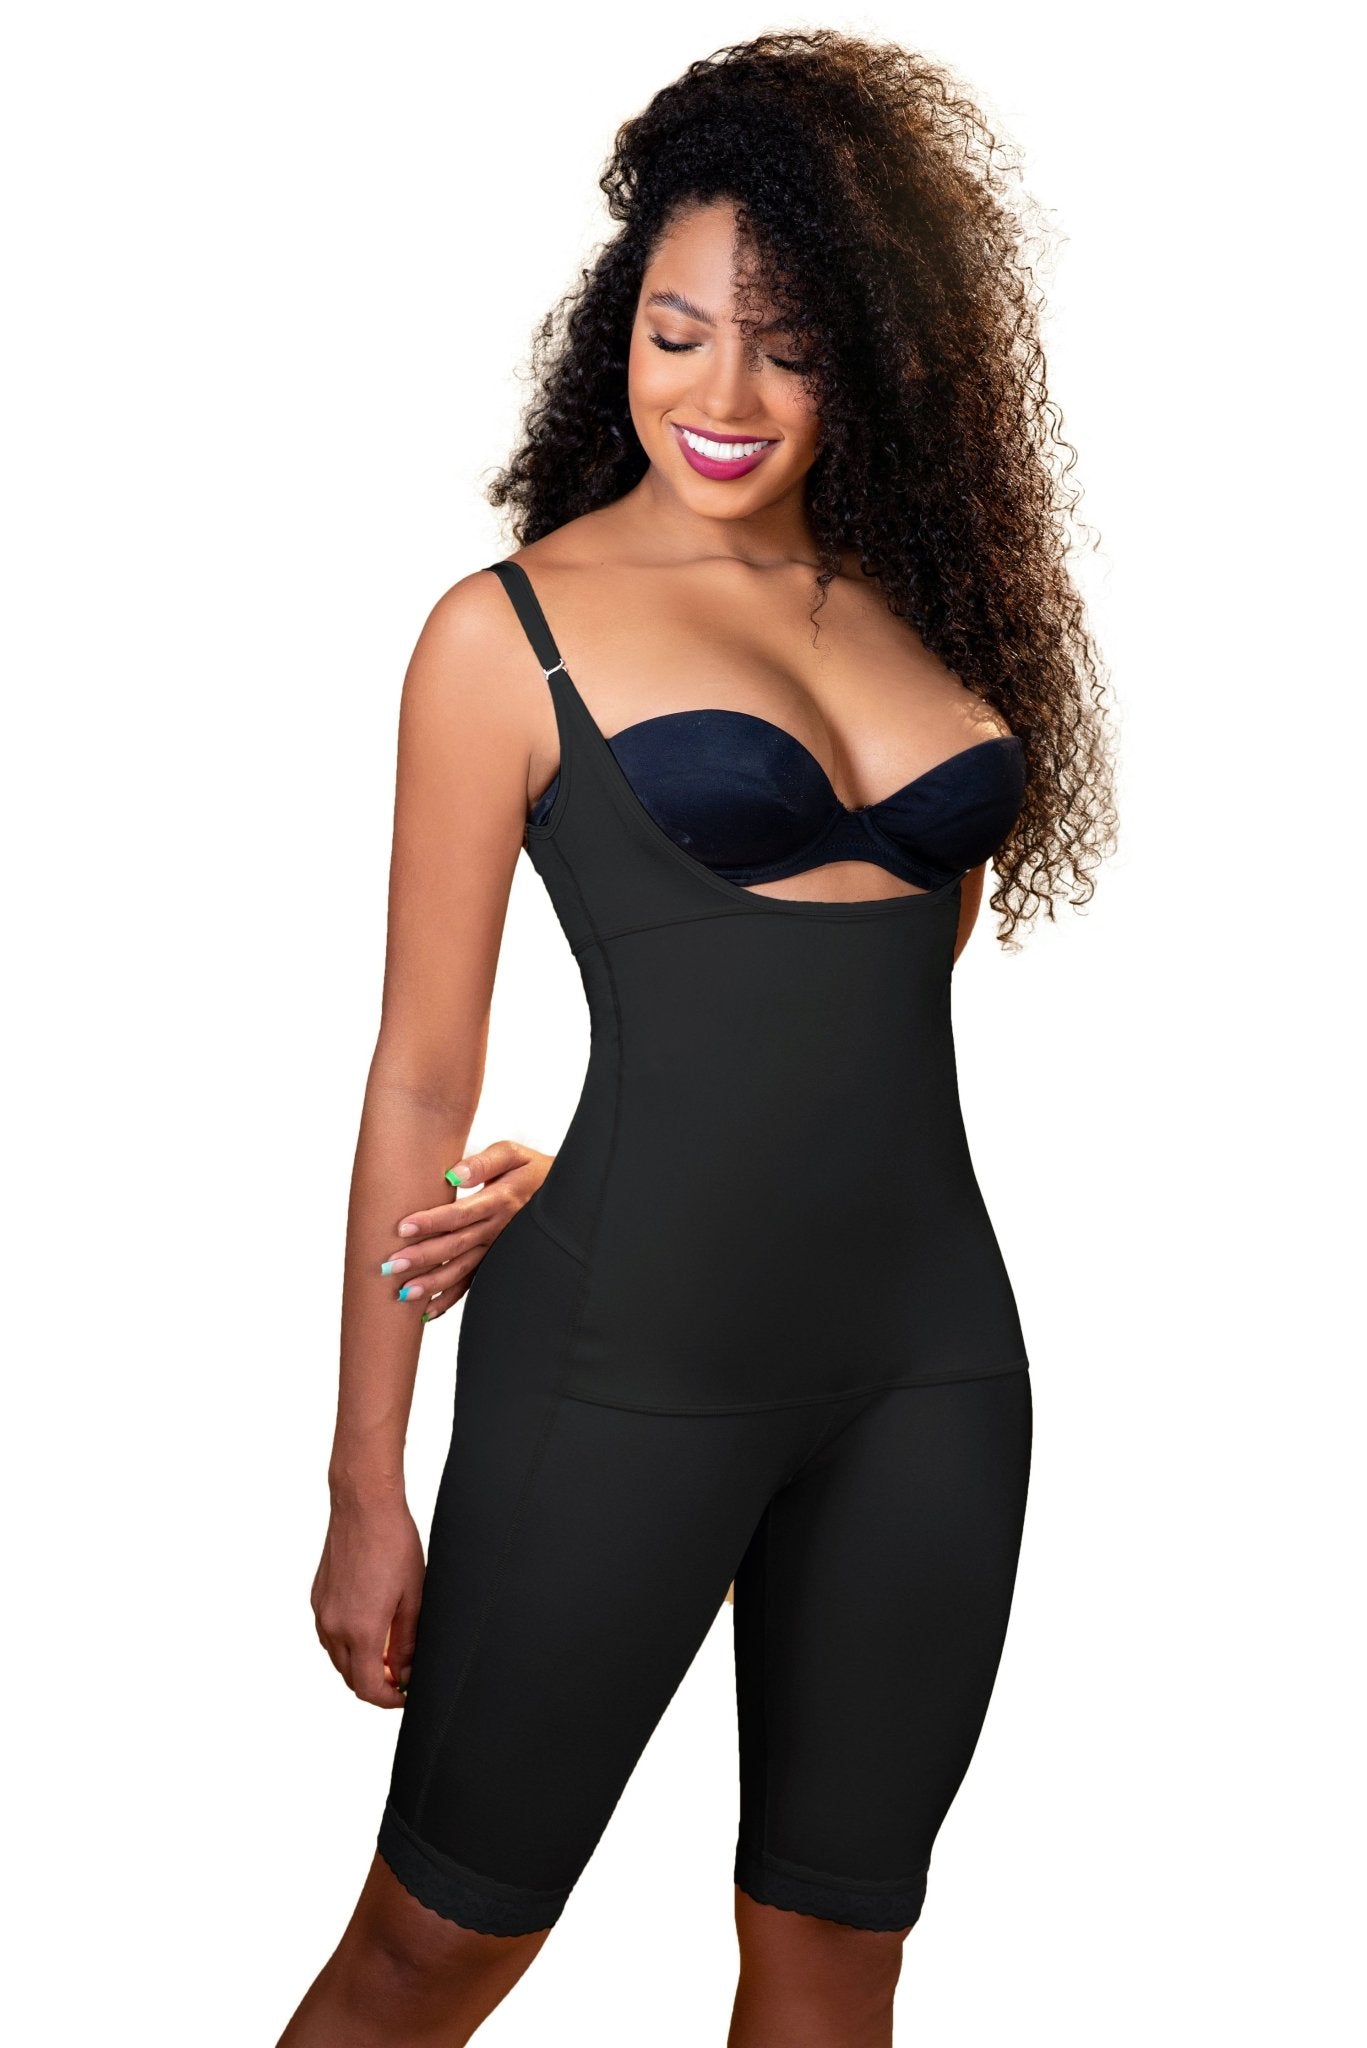 Full Bodyshaper with back support